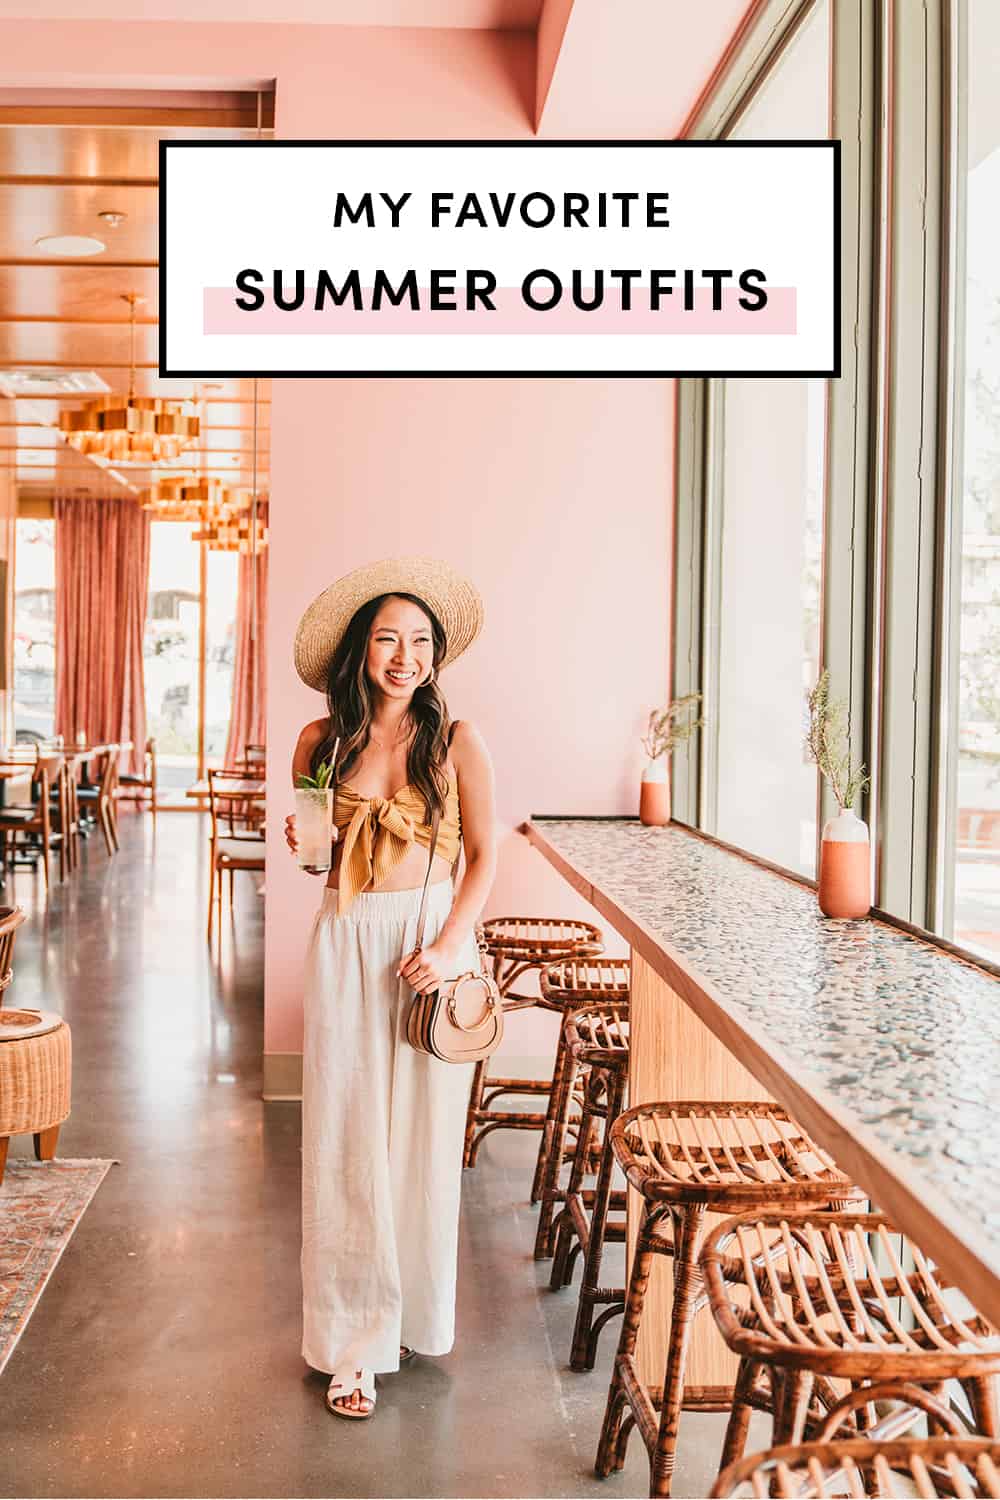 My favorite summer outfits